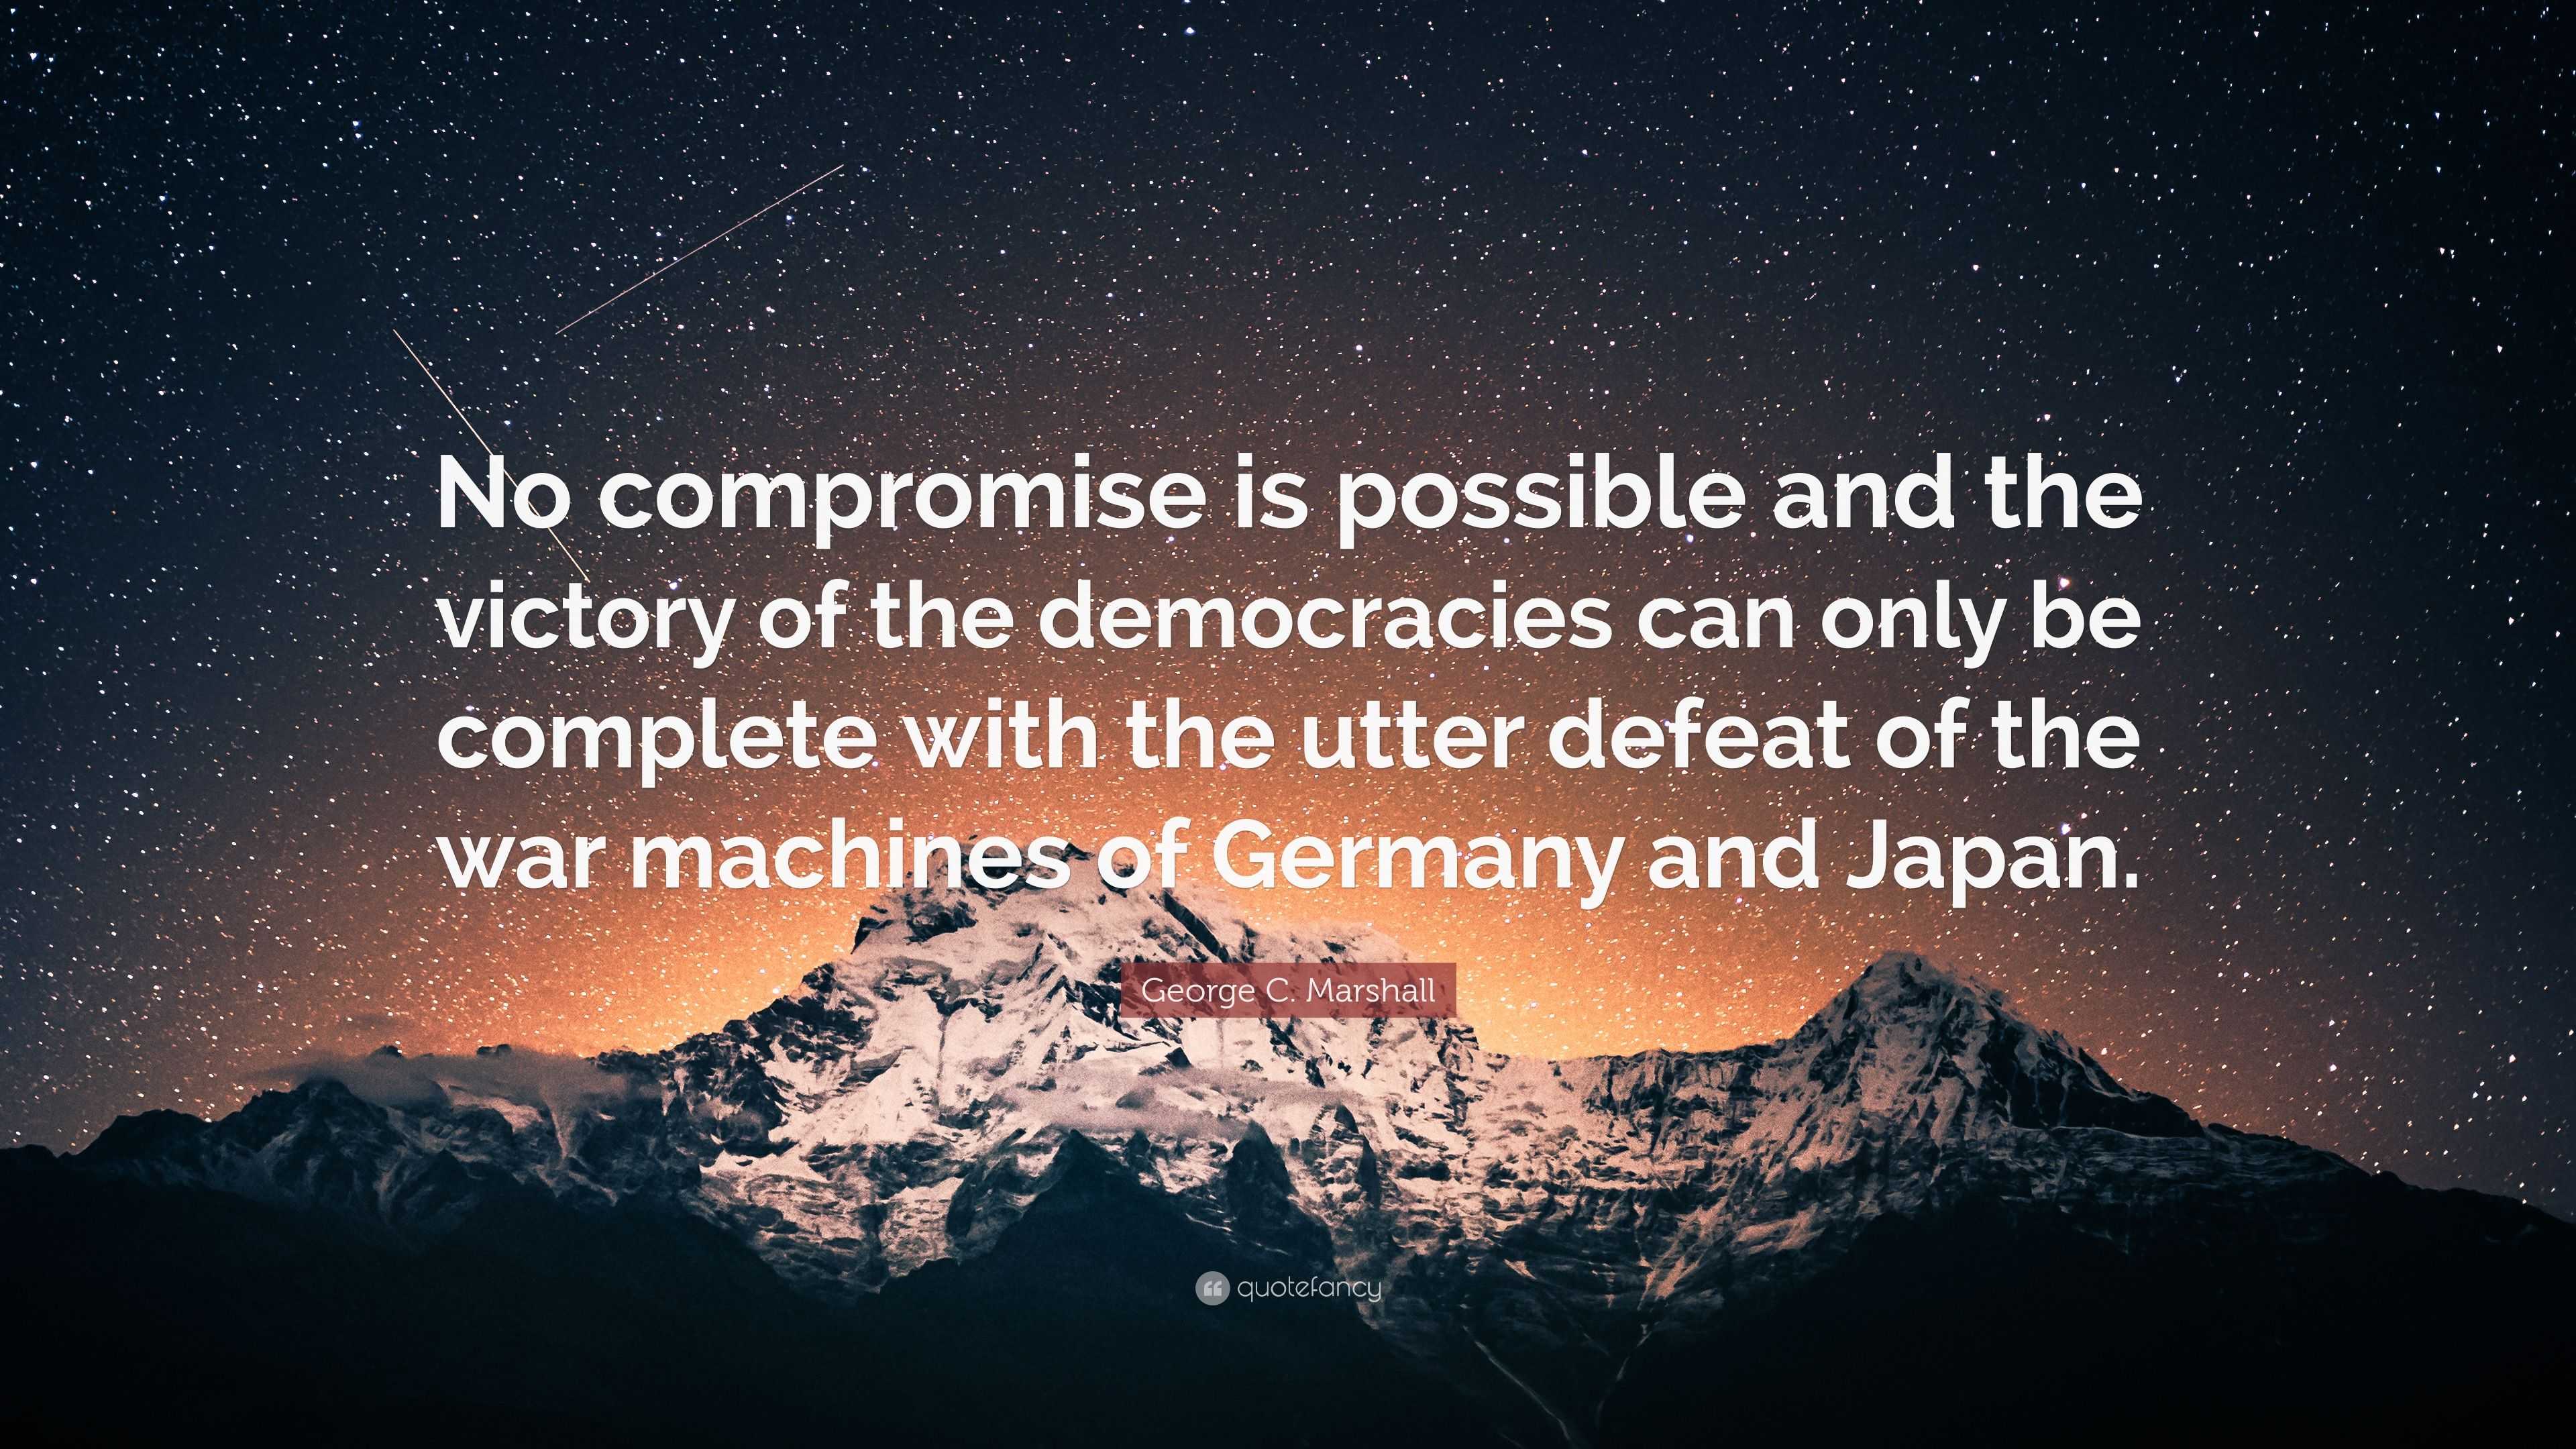 George C. Marshall Quote: “No compromise is possible and the